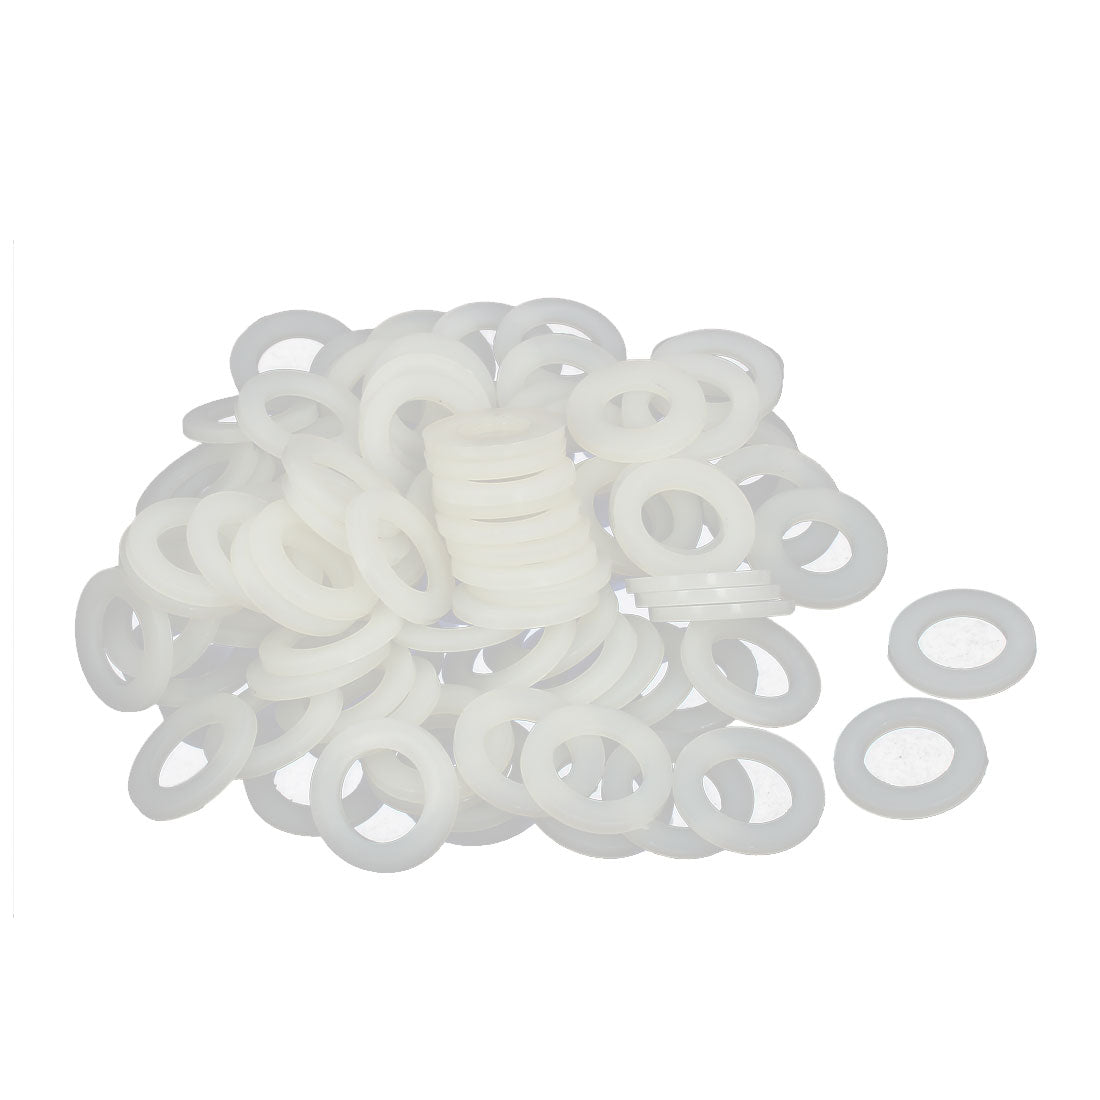 Uxcell Uxcell M5 x 10mm x 1mm Nylon Flat Pads Insulating Washers Gaskets Fastener 100PCS